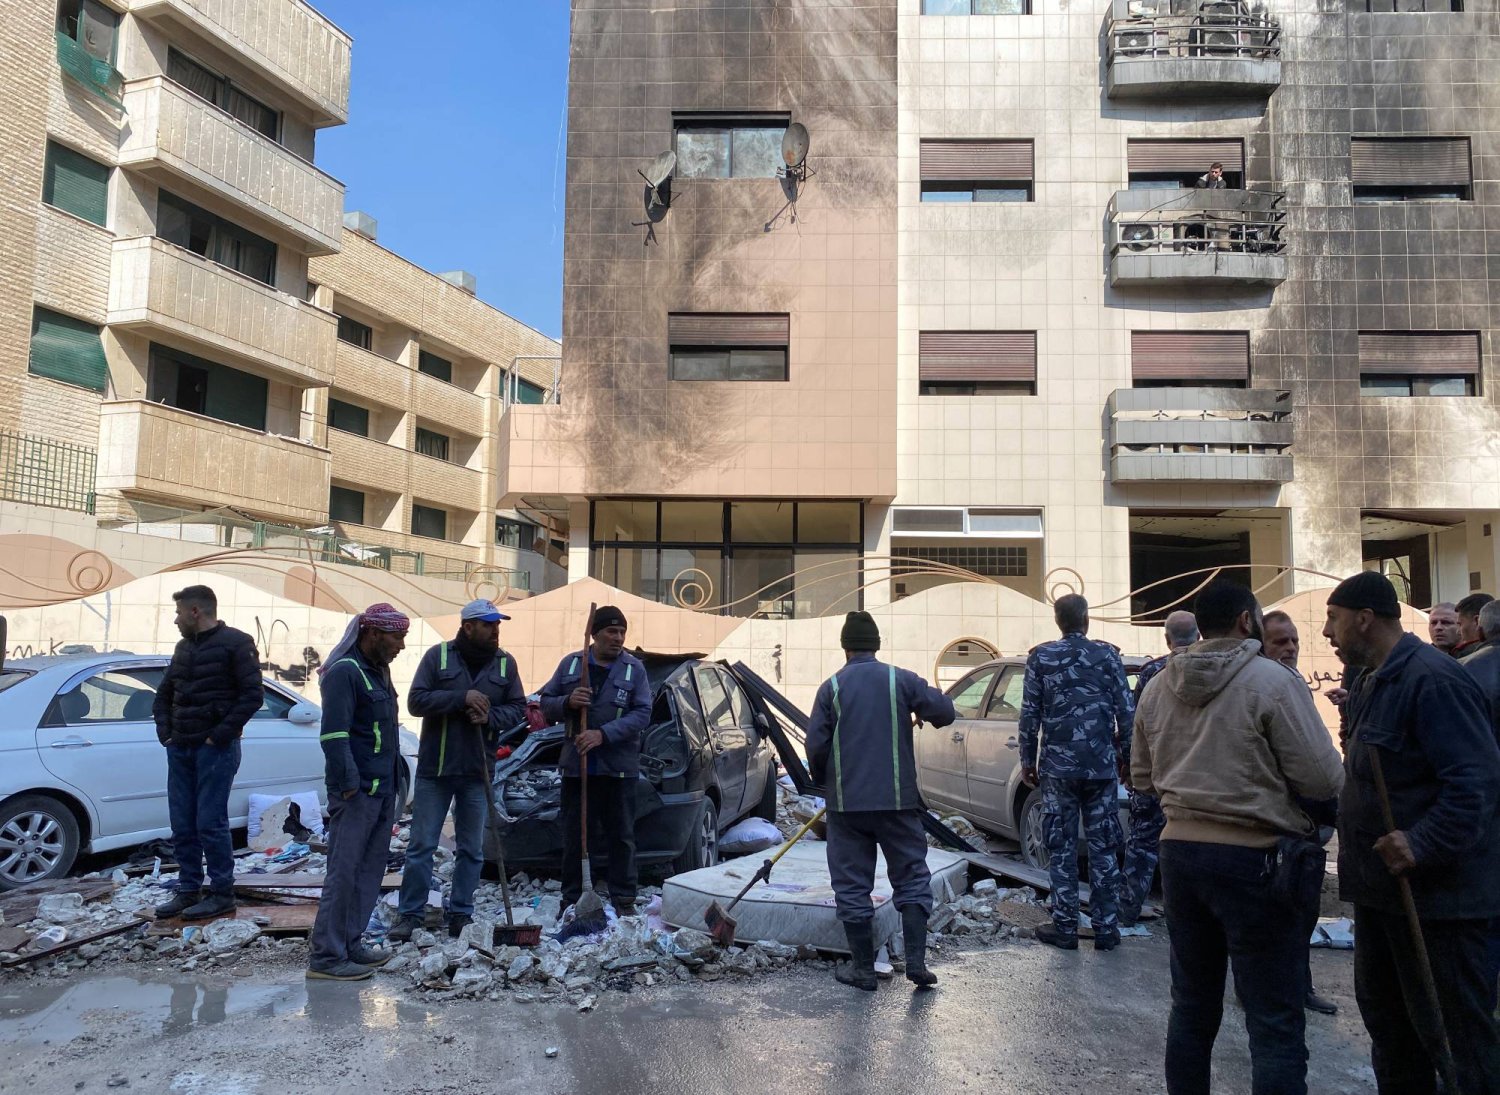 Workers and people stand near a damaged building after, according to Syrian state media reports, several Israeli missiles hit a residential building in the Kafr Sousa district, Damascus, Syria  February 21, 2024. REUTERS/Firas Makdesi